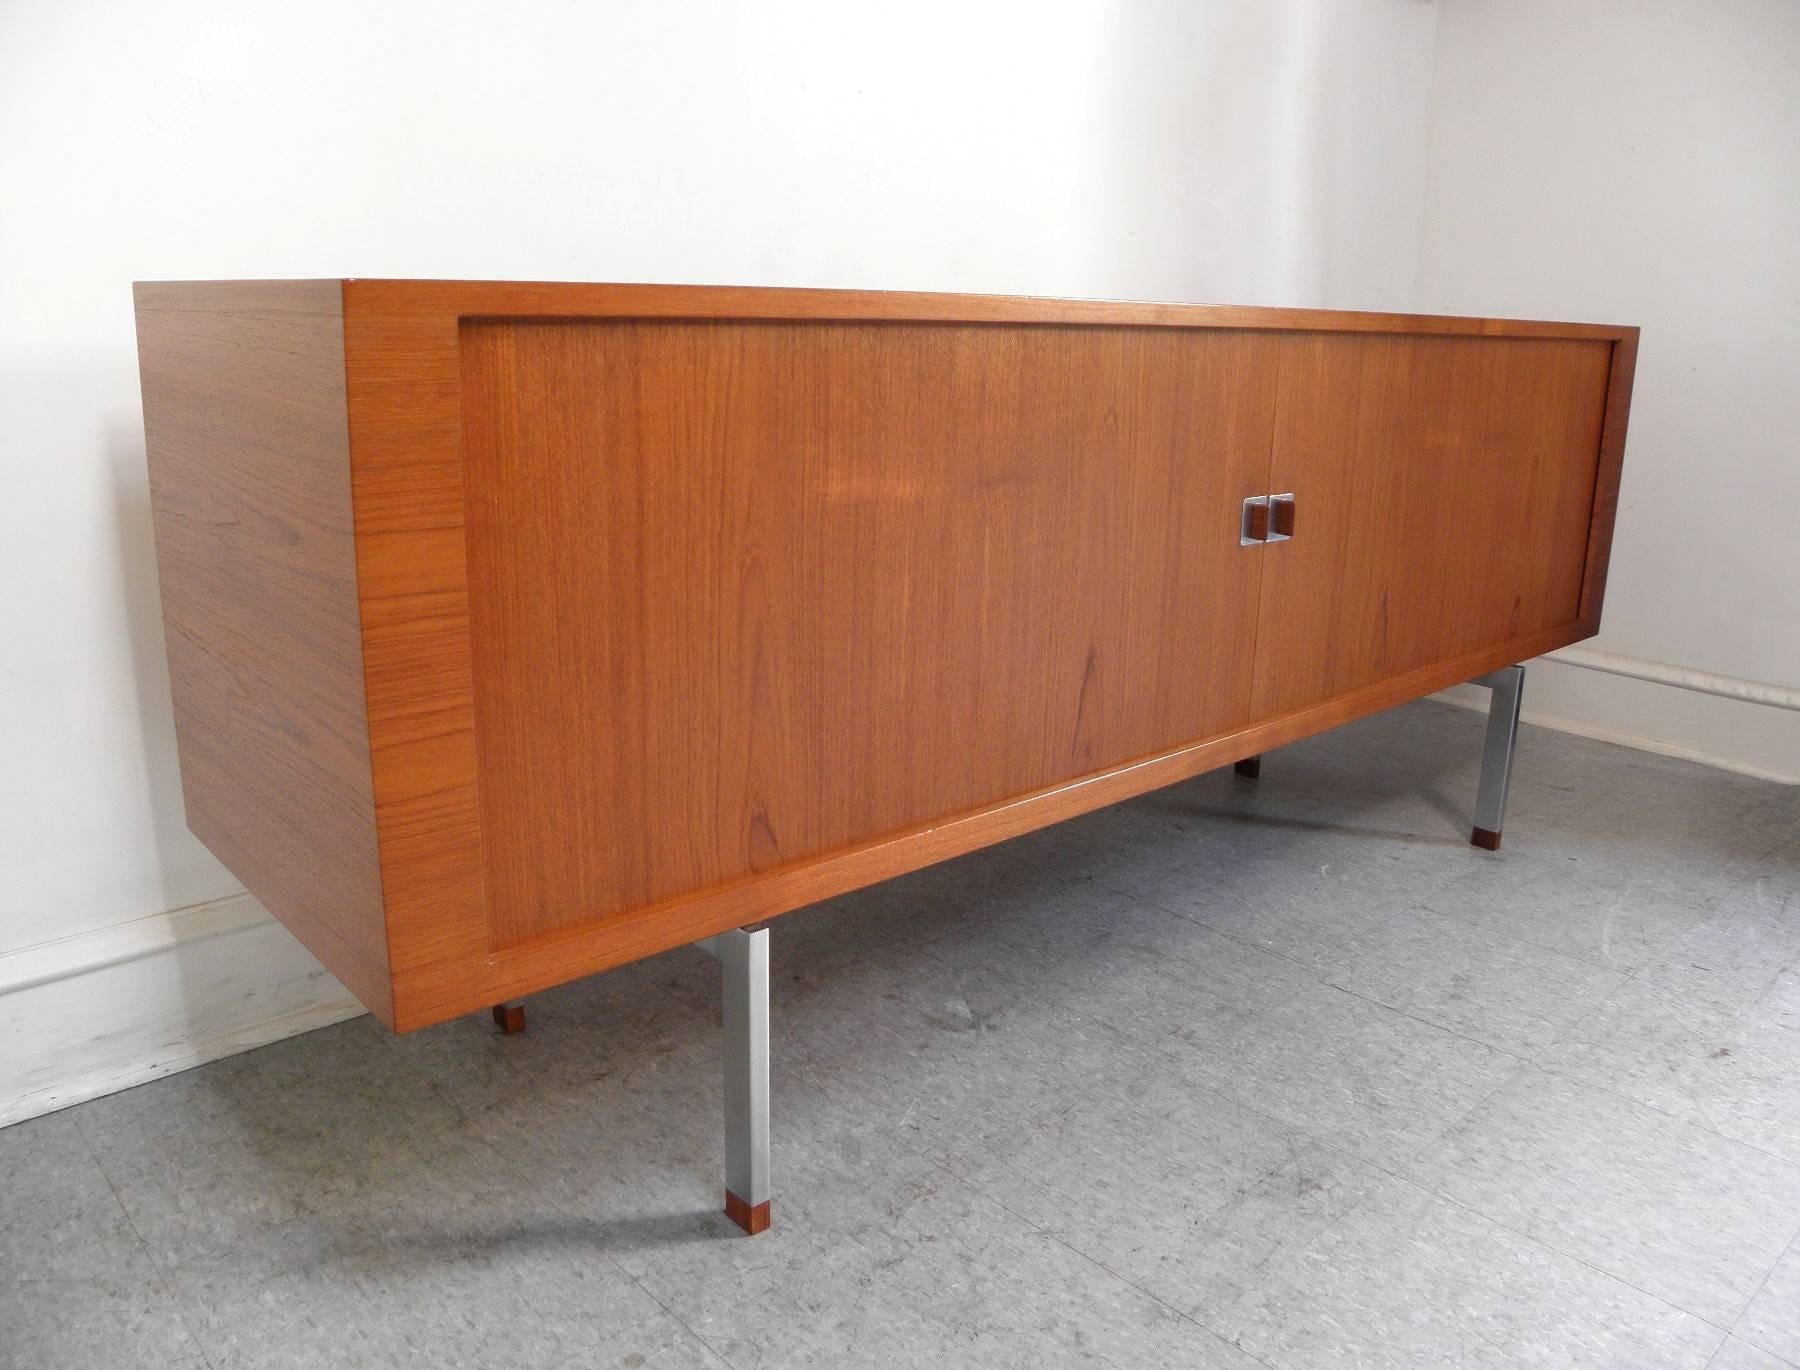 Handsome President credenza in teak designed by Hans Wegner and manufactured in Denmark by Ry Mobler. This credenza has tambour doors and stainless steel legs and accents.